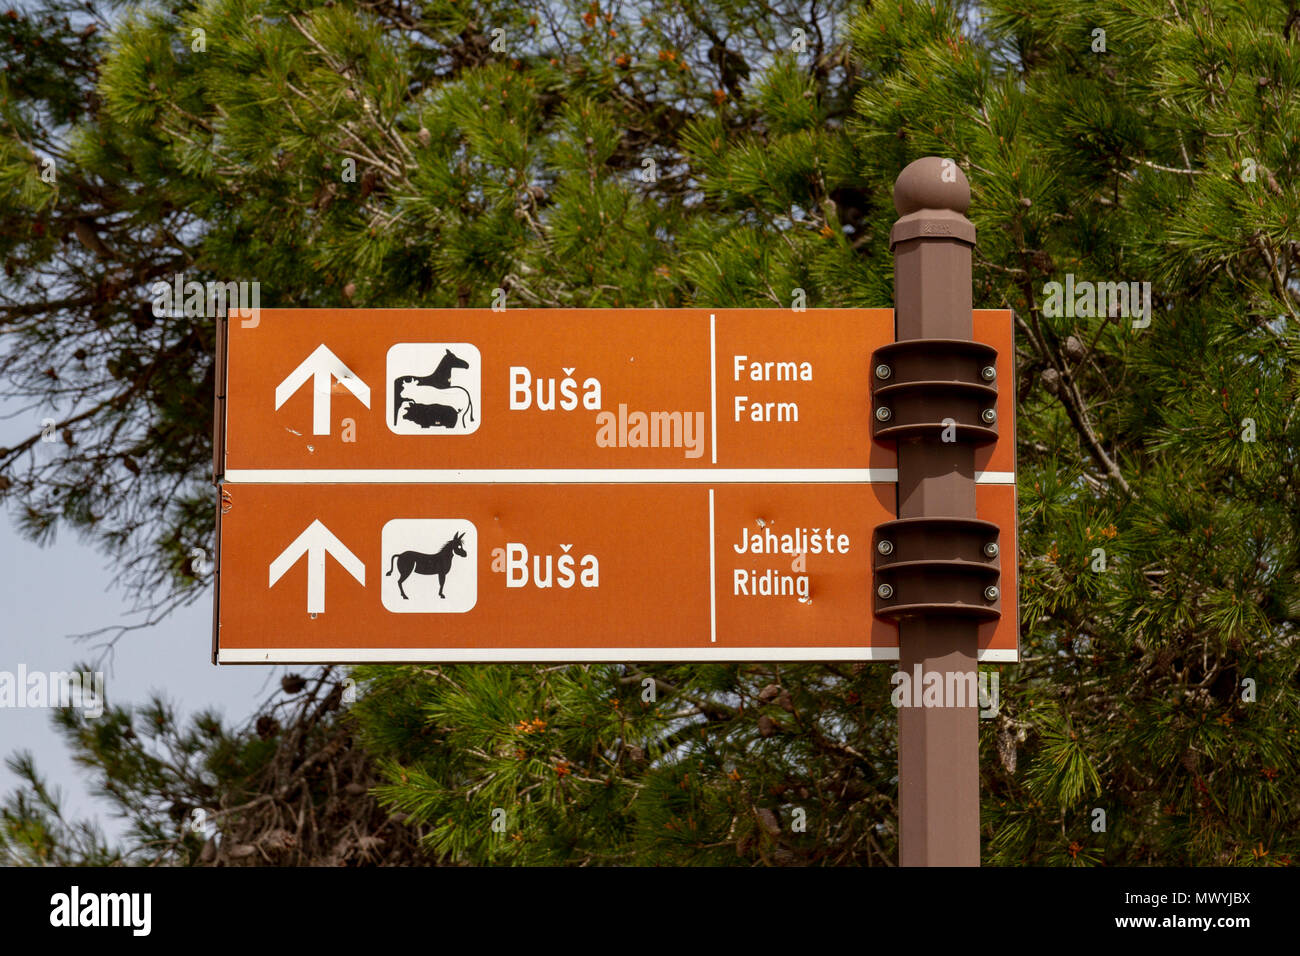 Tourist signpost showing a farm and a riding attraction in the Old City of Dubrovnik, Croatia. Stock Photo